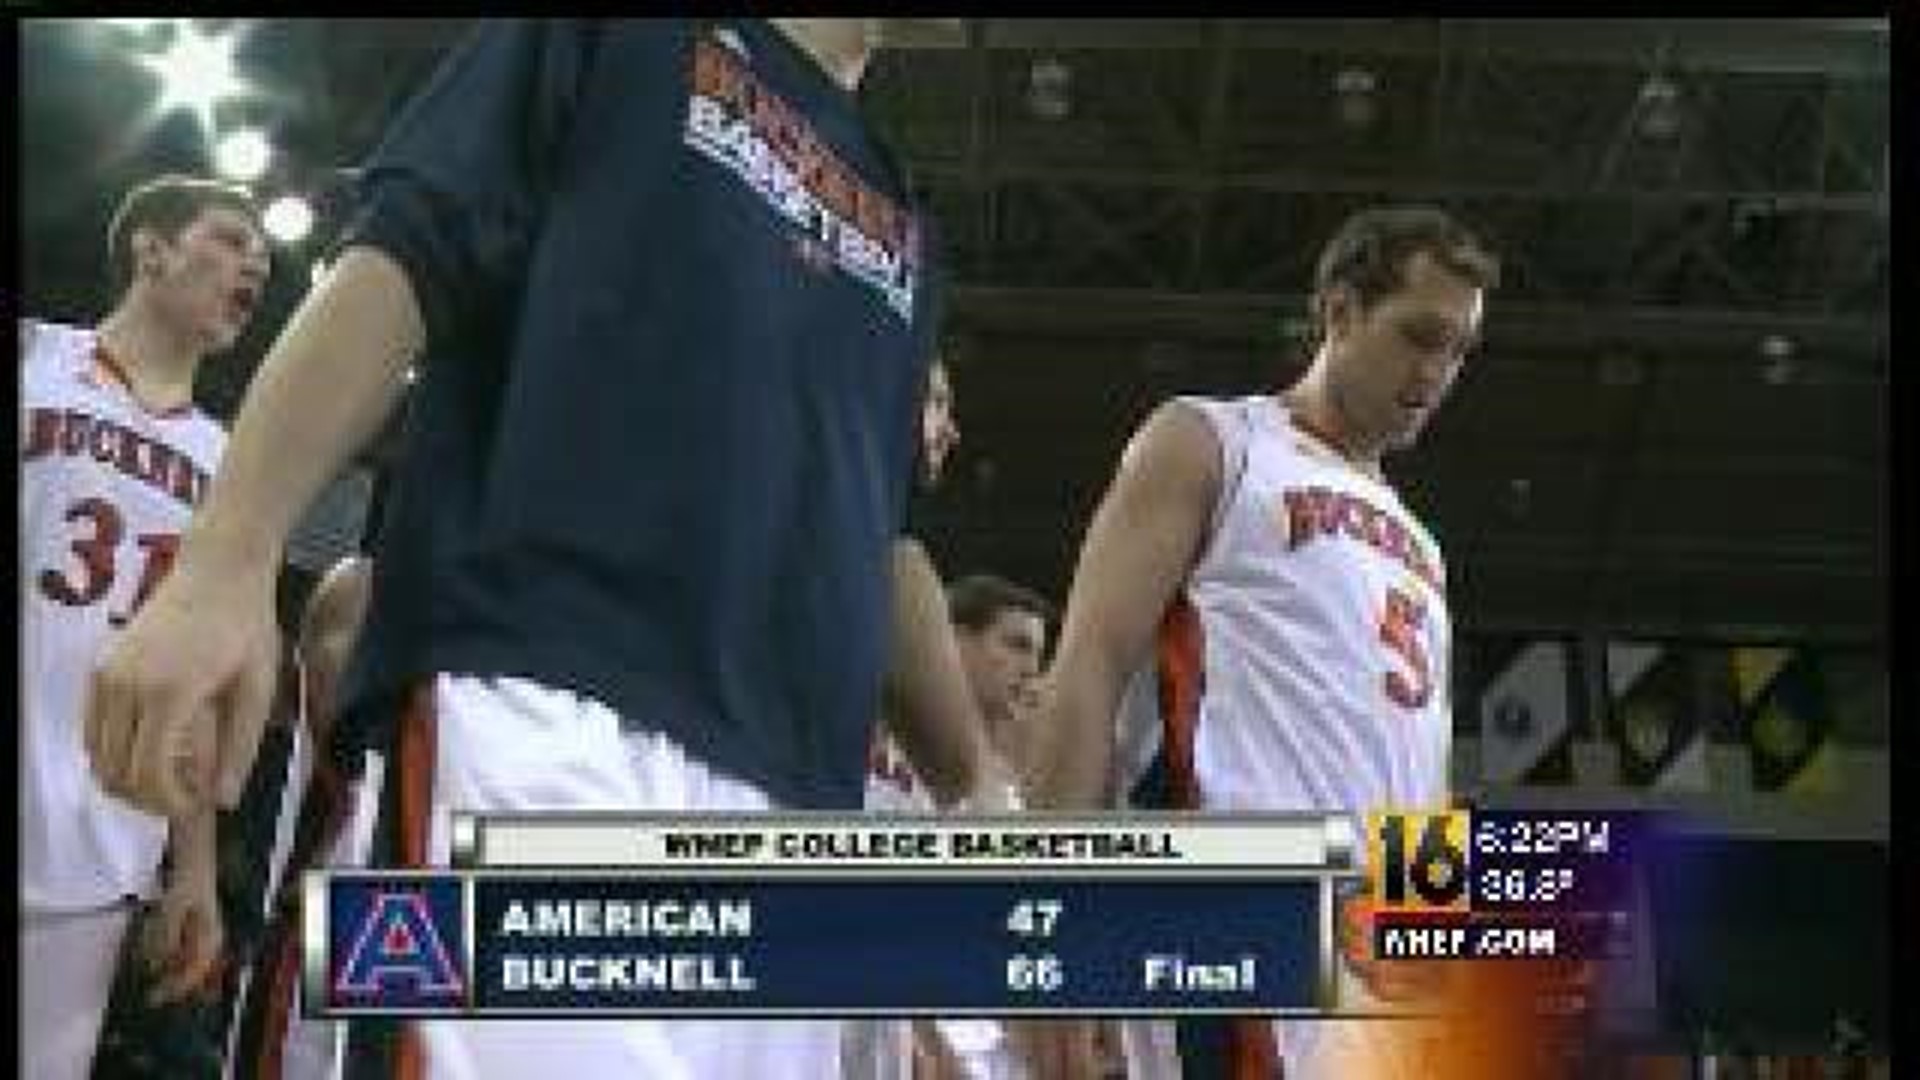 Bucknell Claims #1 seed